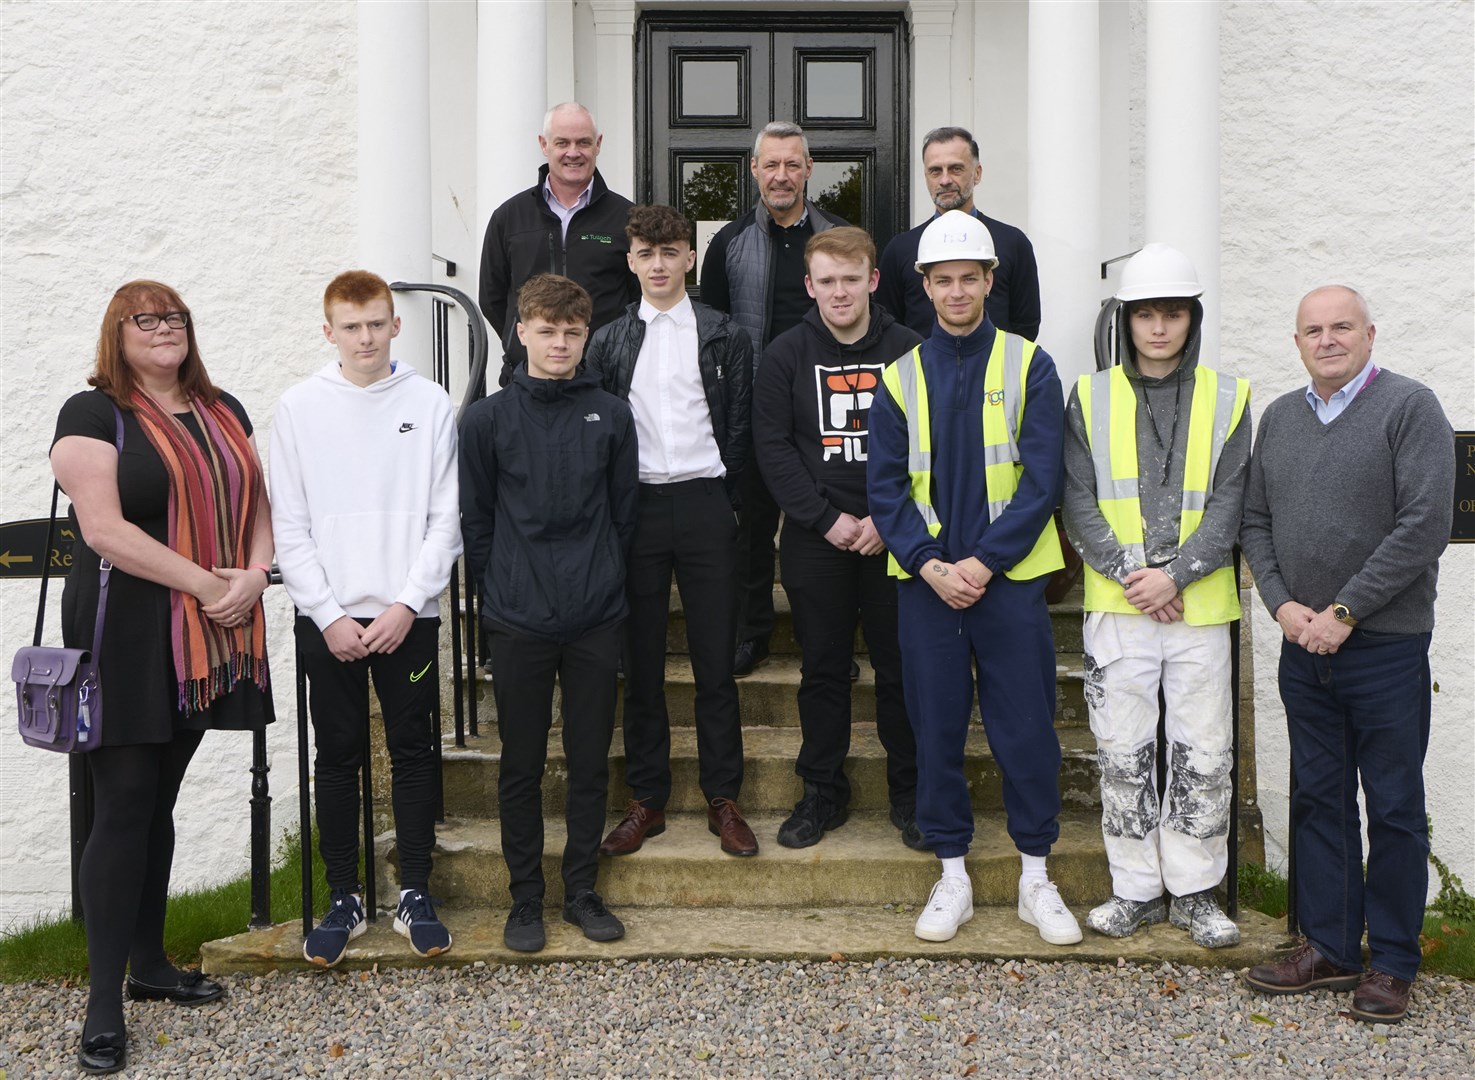 The Tulloch Homes new boys and their mentors. Back row from left, Hugh Macgillivray, Gordon Macallister and Dave Macdonald. Front from left are Pauline Tuthill, apprentices Scott Cameron, Arran Legge, Ronnie Fraser, Ewan Bremner, Riley Barclay and Dylan Lowry with David Patience.